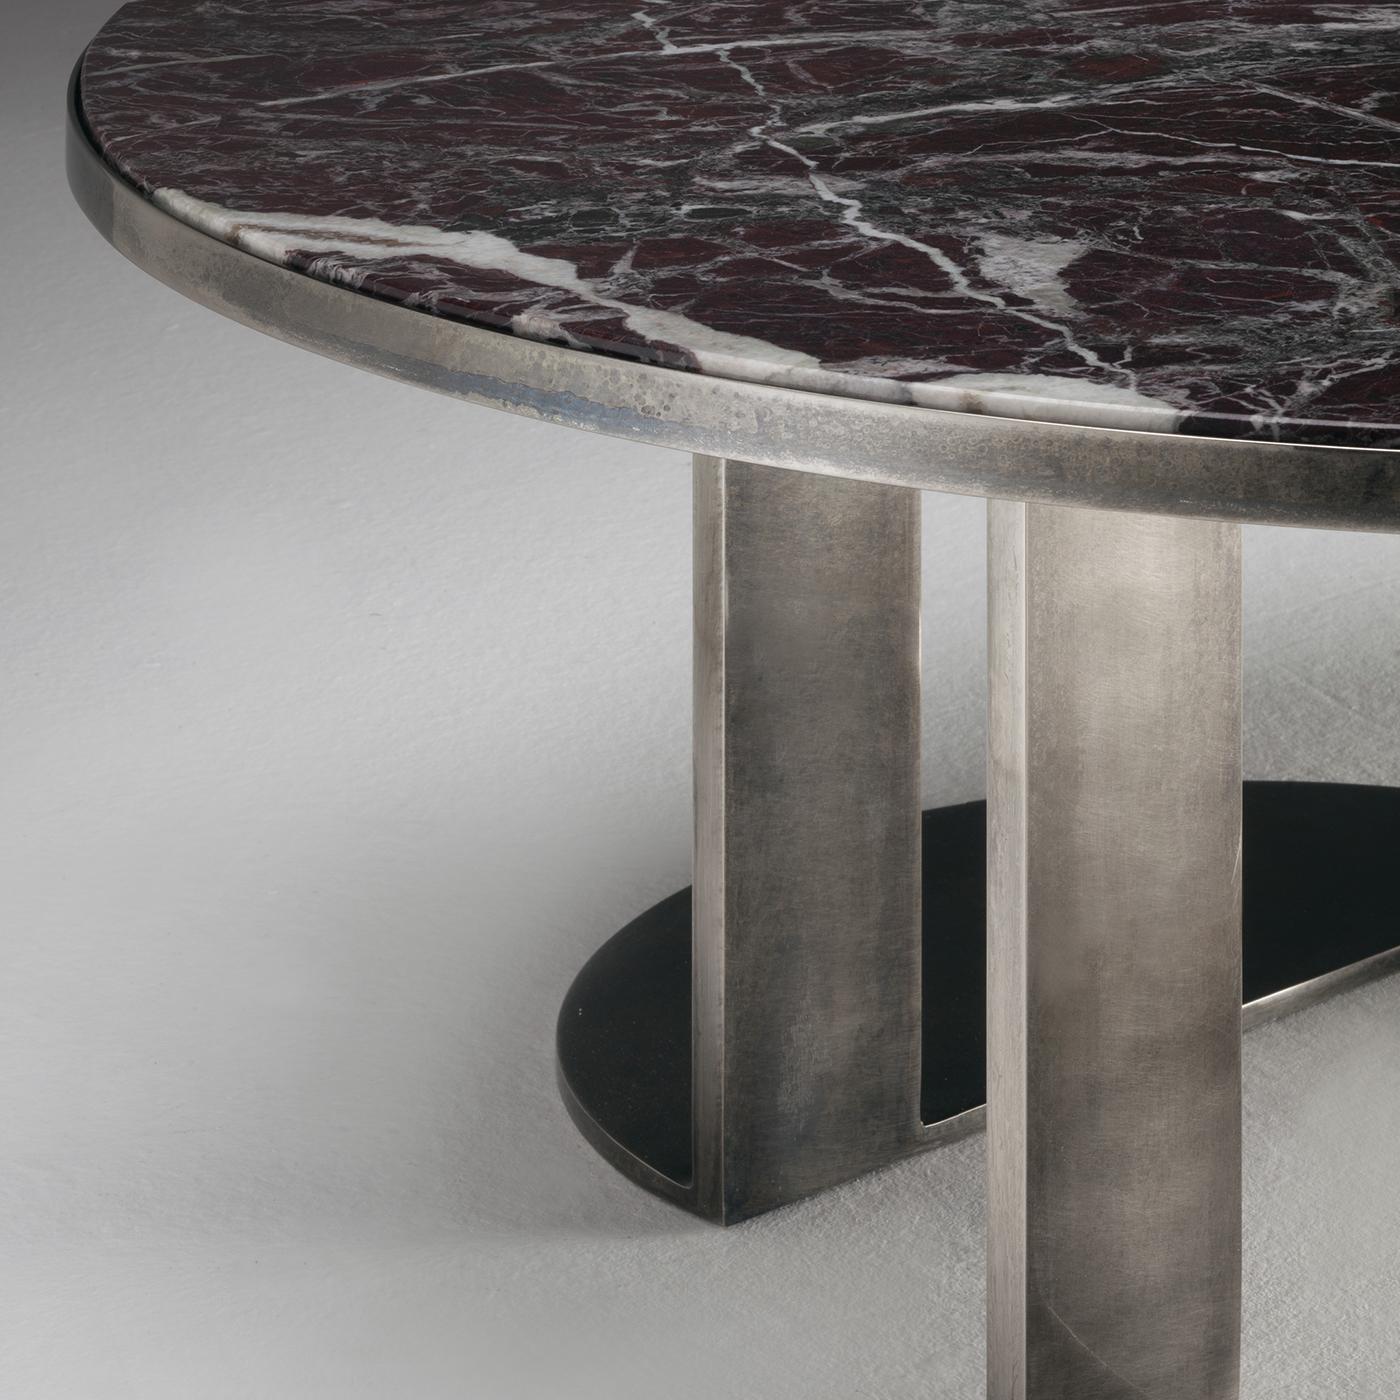 Italian Giotto Coffee Table by Luciano Pasut